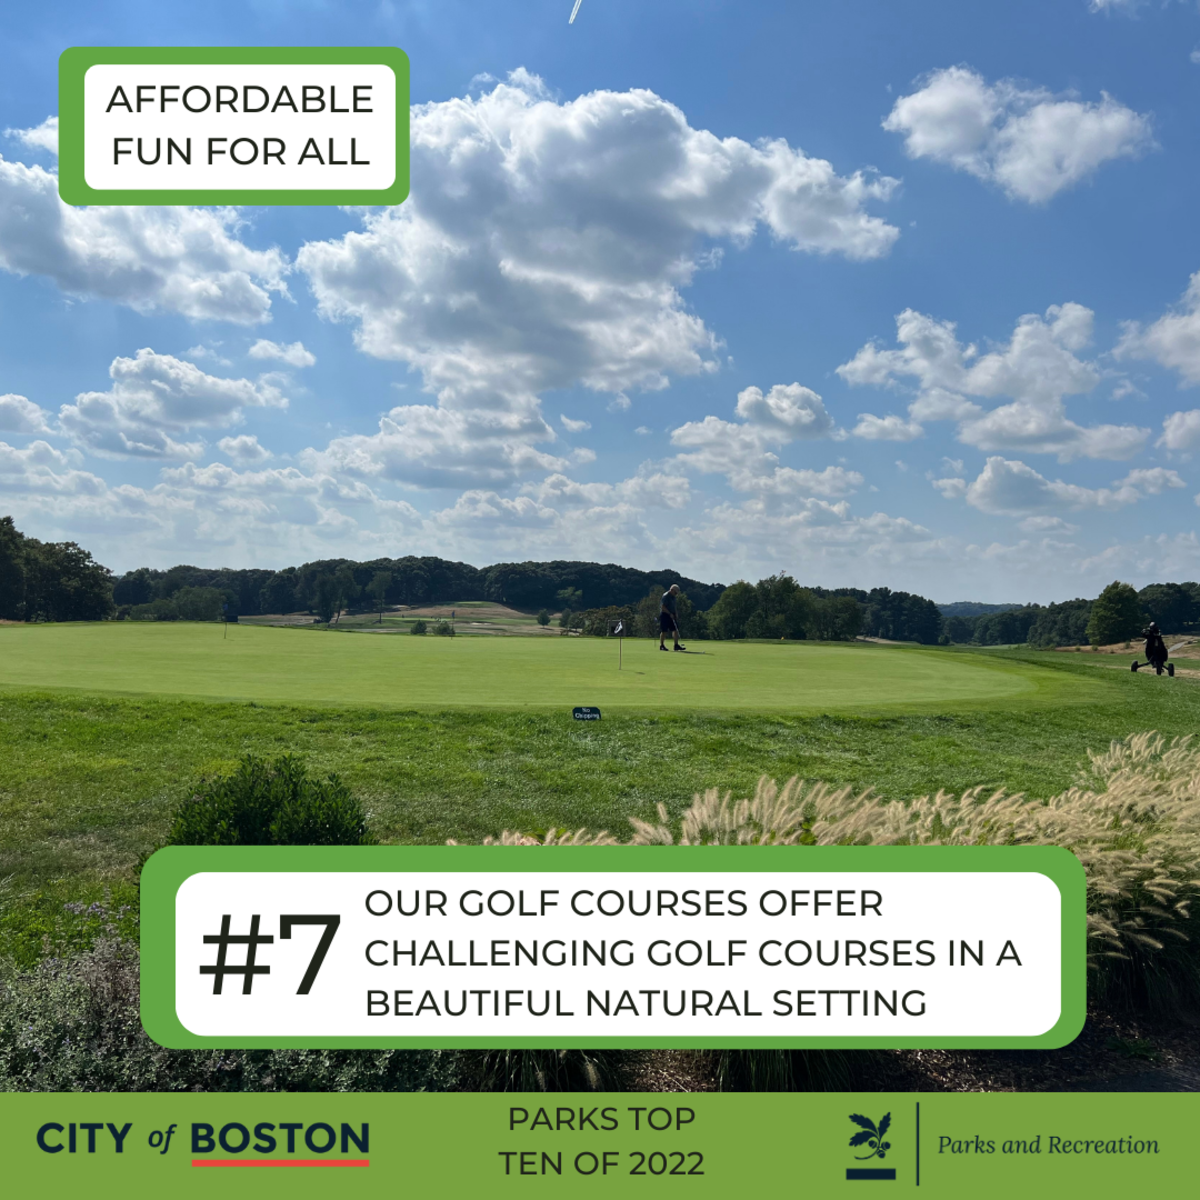 Parks top ten of 2022 #7 Our Golf courses offer challenging golf courses in a beautiful natural setting